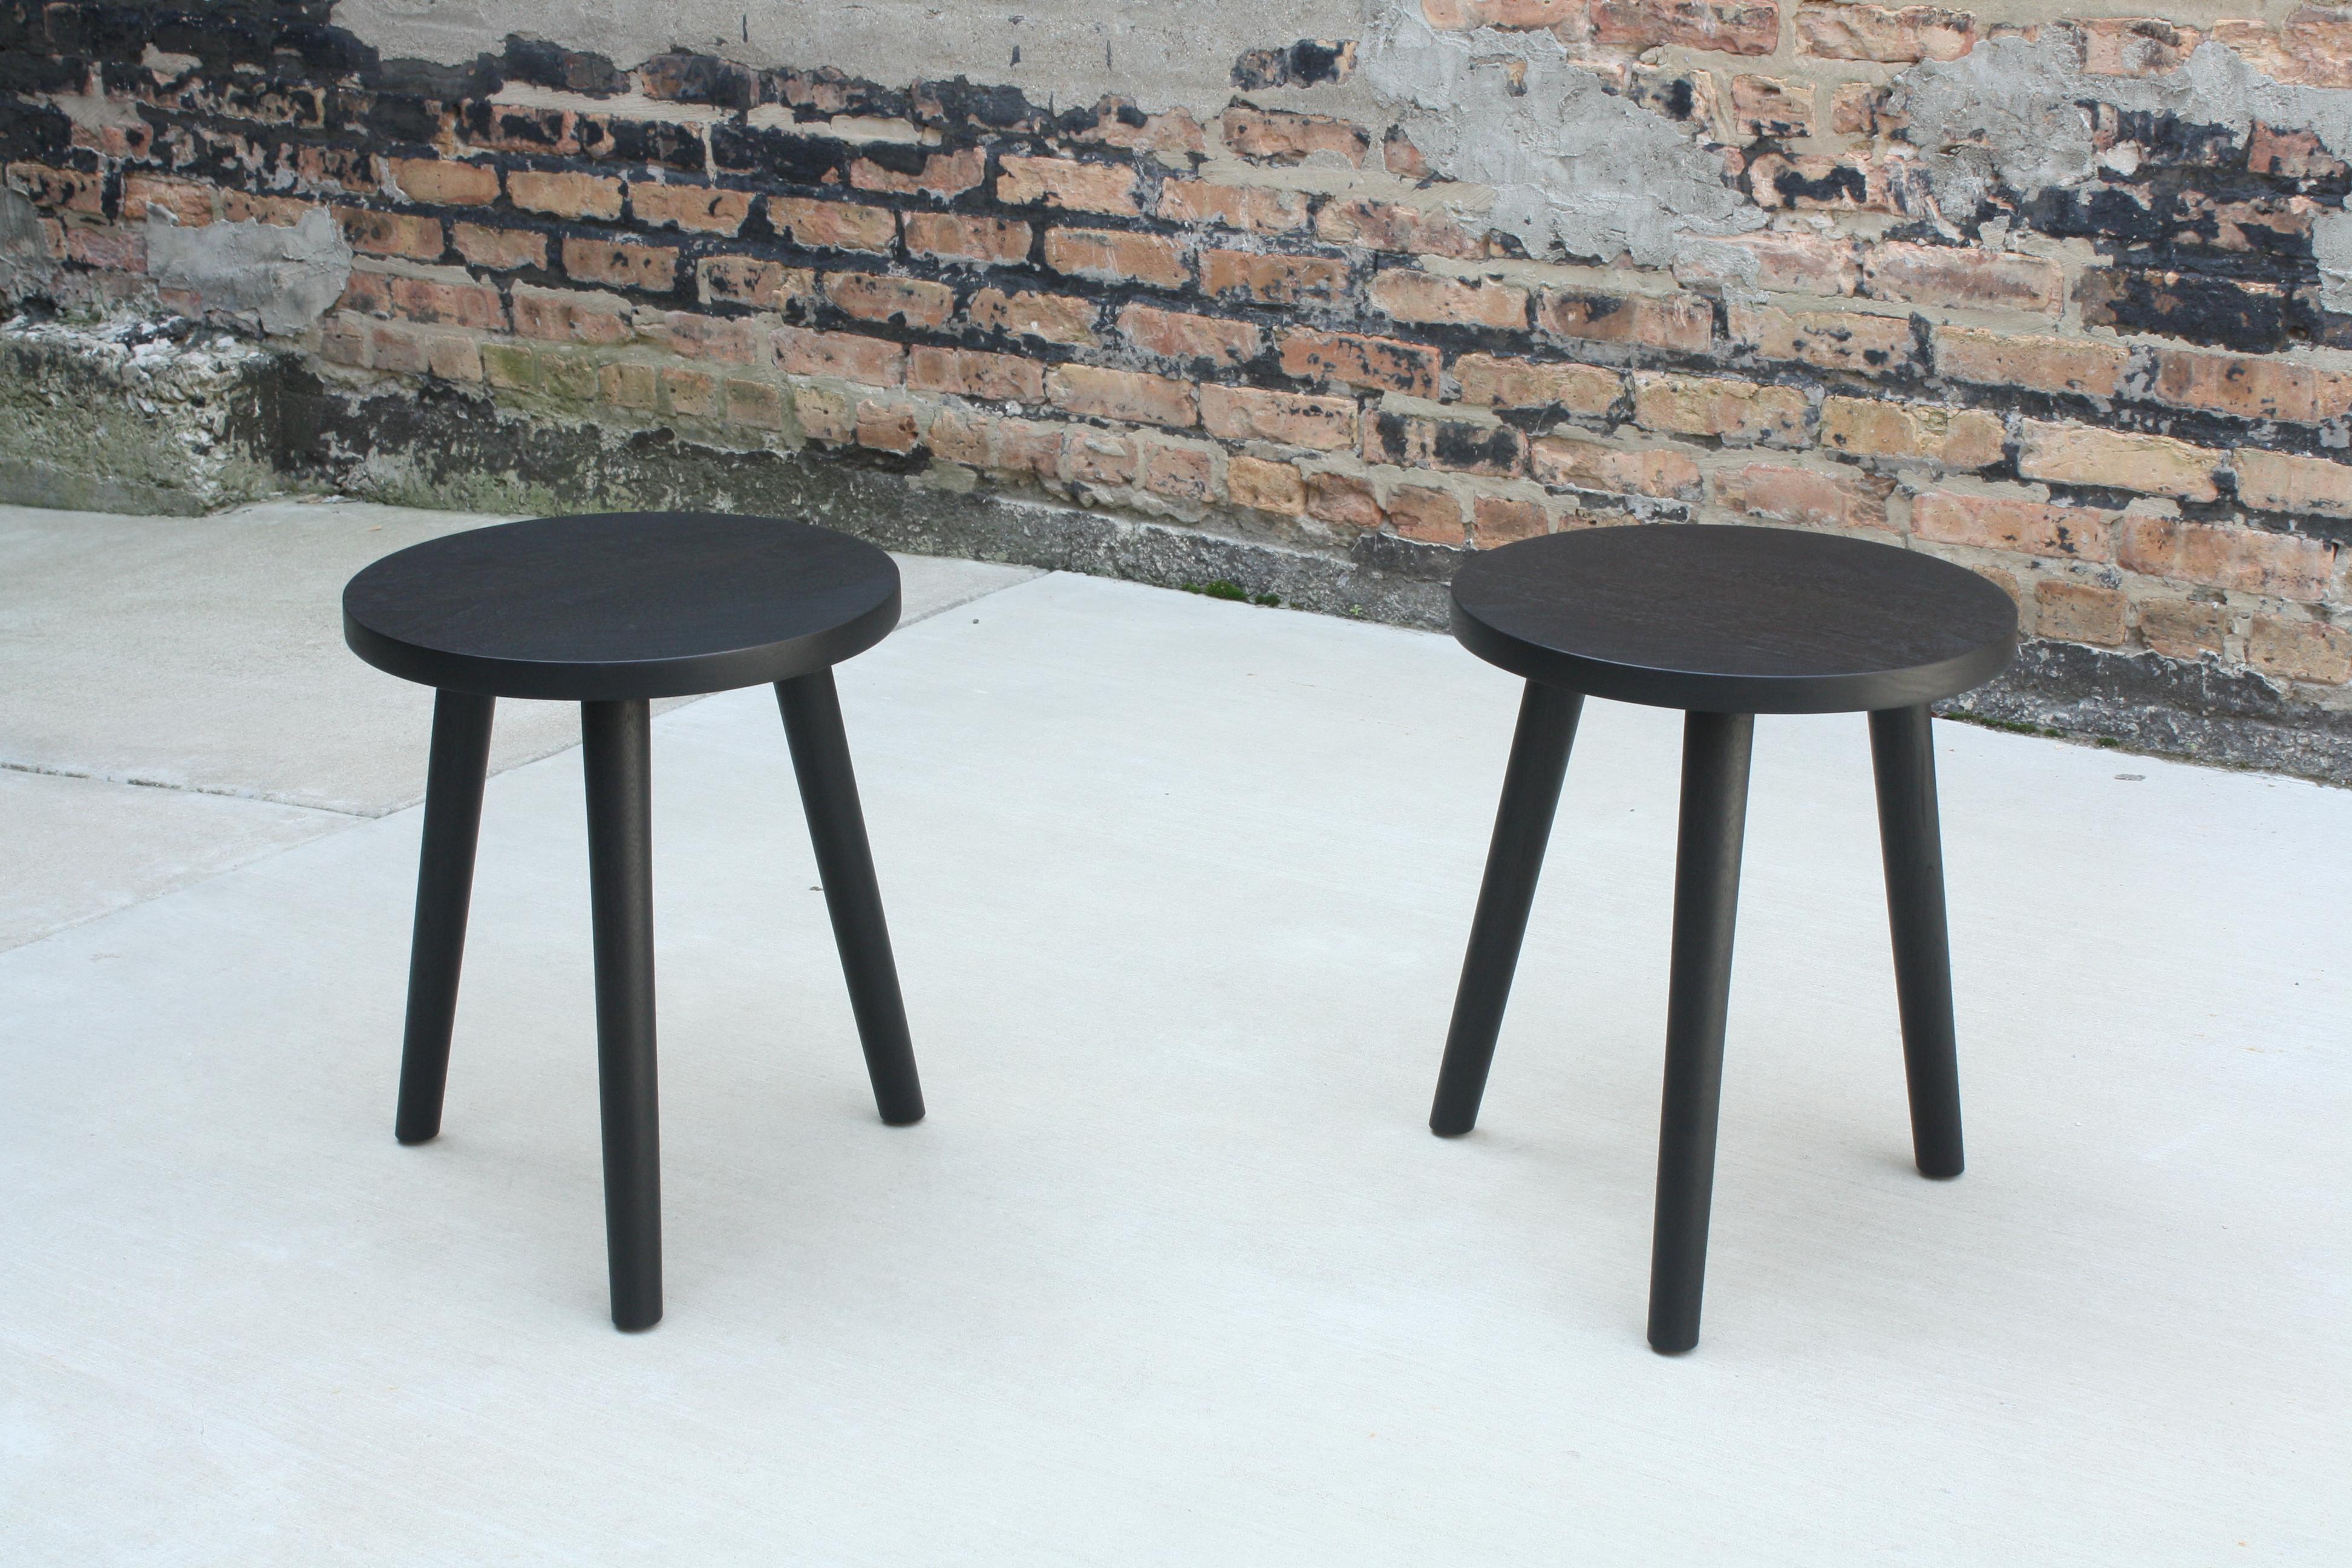 Ebonized Bare a Handmade Wood Side Table Available in Custom Sizing and Finishes by Laylo For Sale